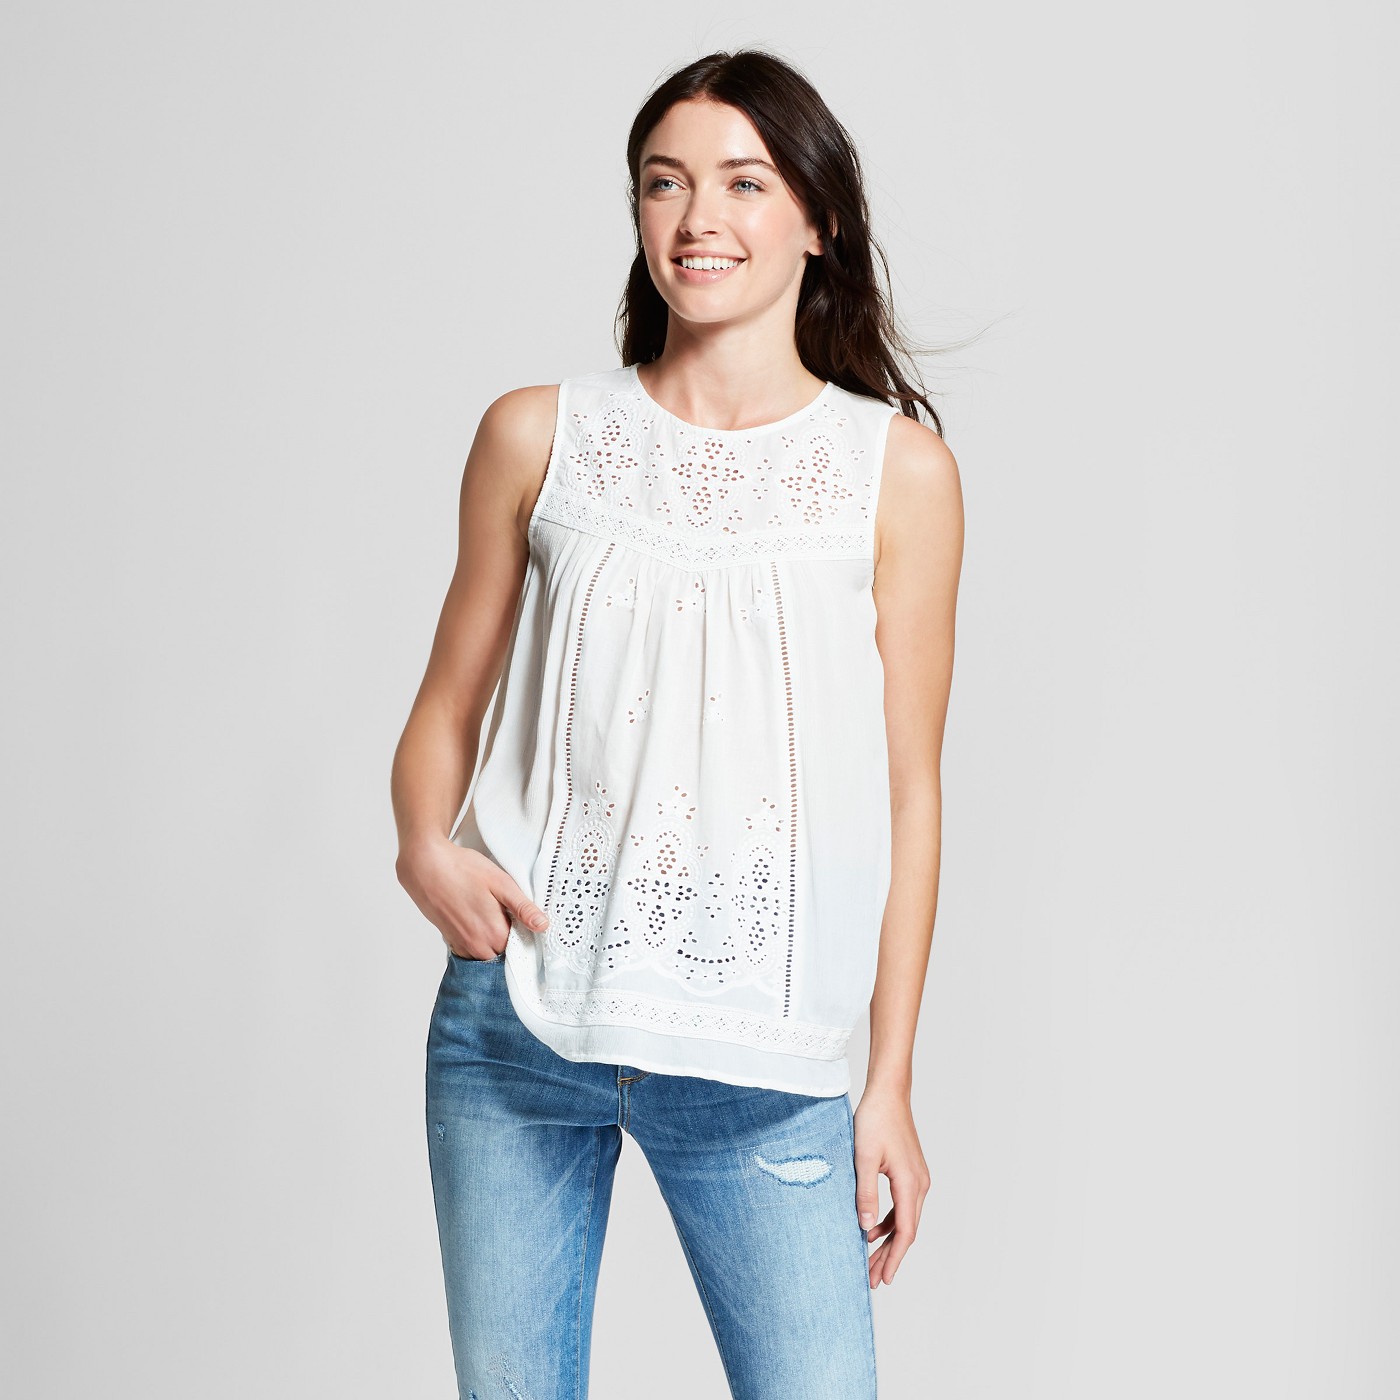 Women's Eyelet Knit to Woven Tank - Knox Roseâ„¢ White - image 1 of 2